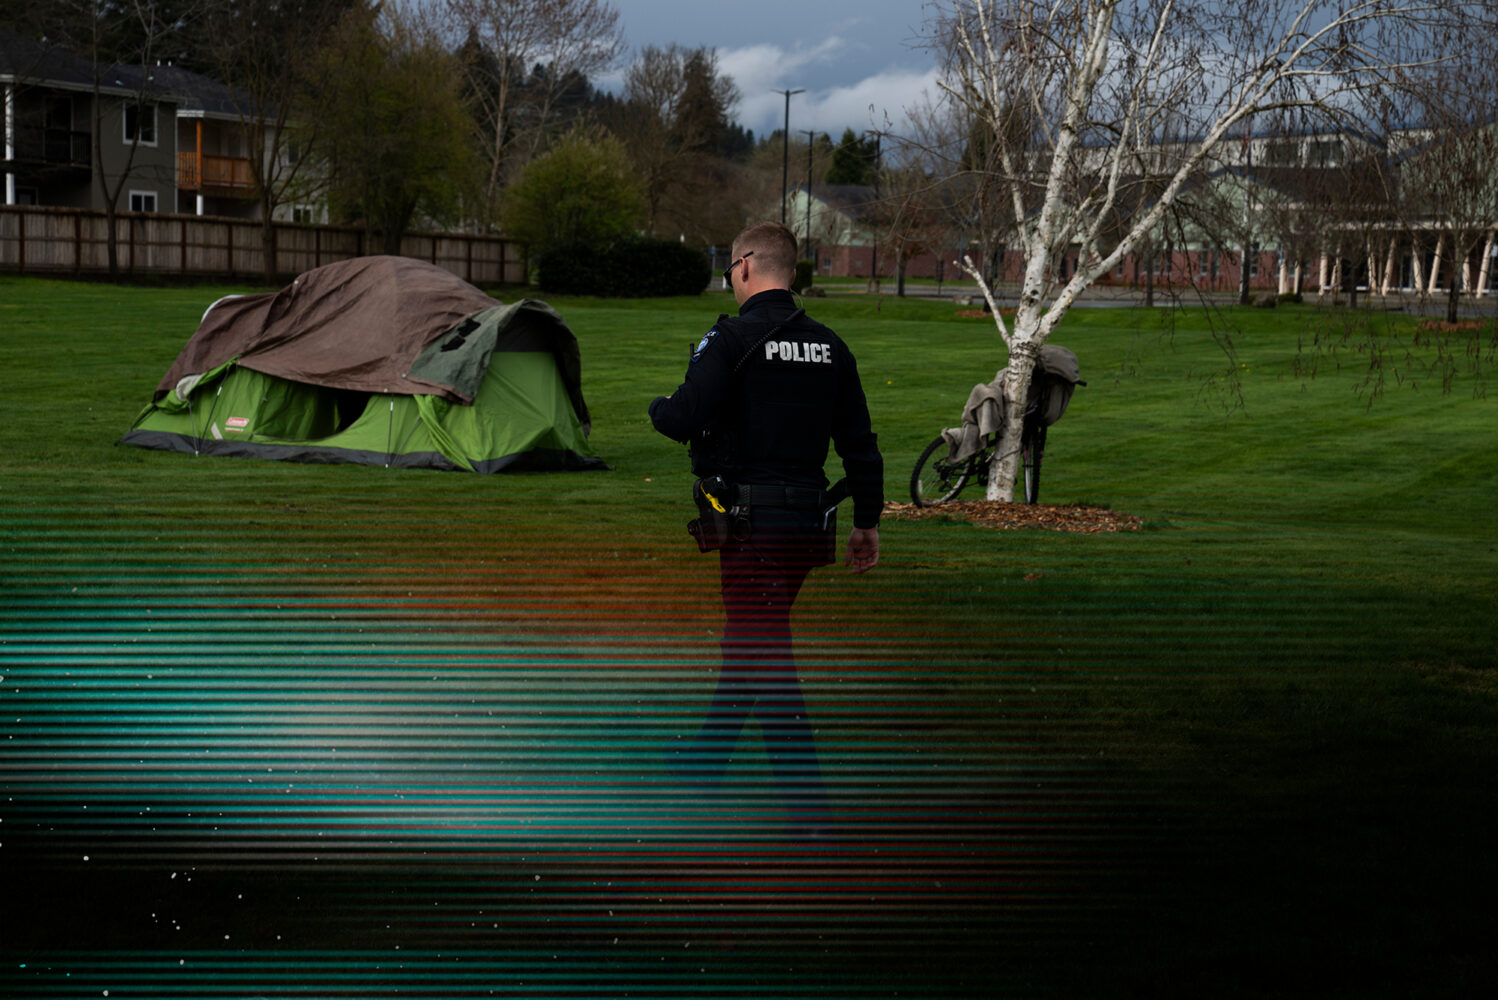 Photo: A picture of a man in a police uniform walking through a field that has a tent. There is a glitch overlay over the image